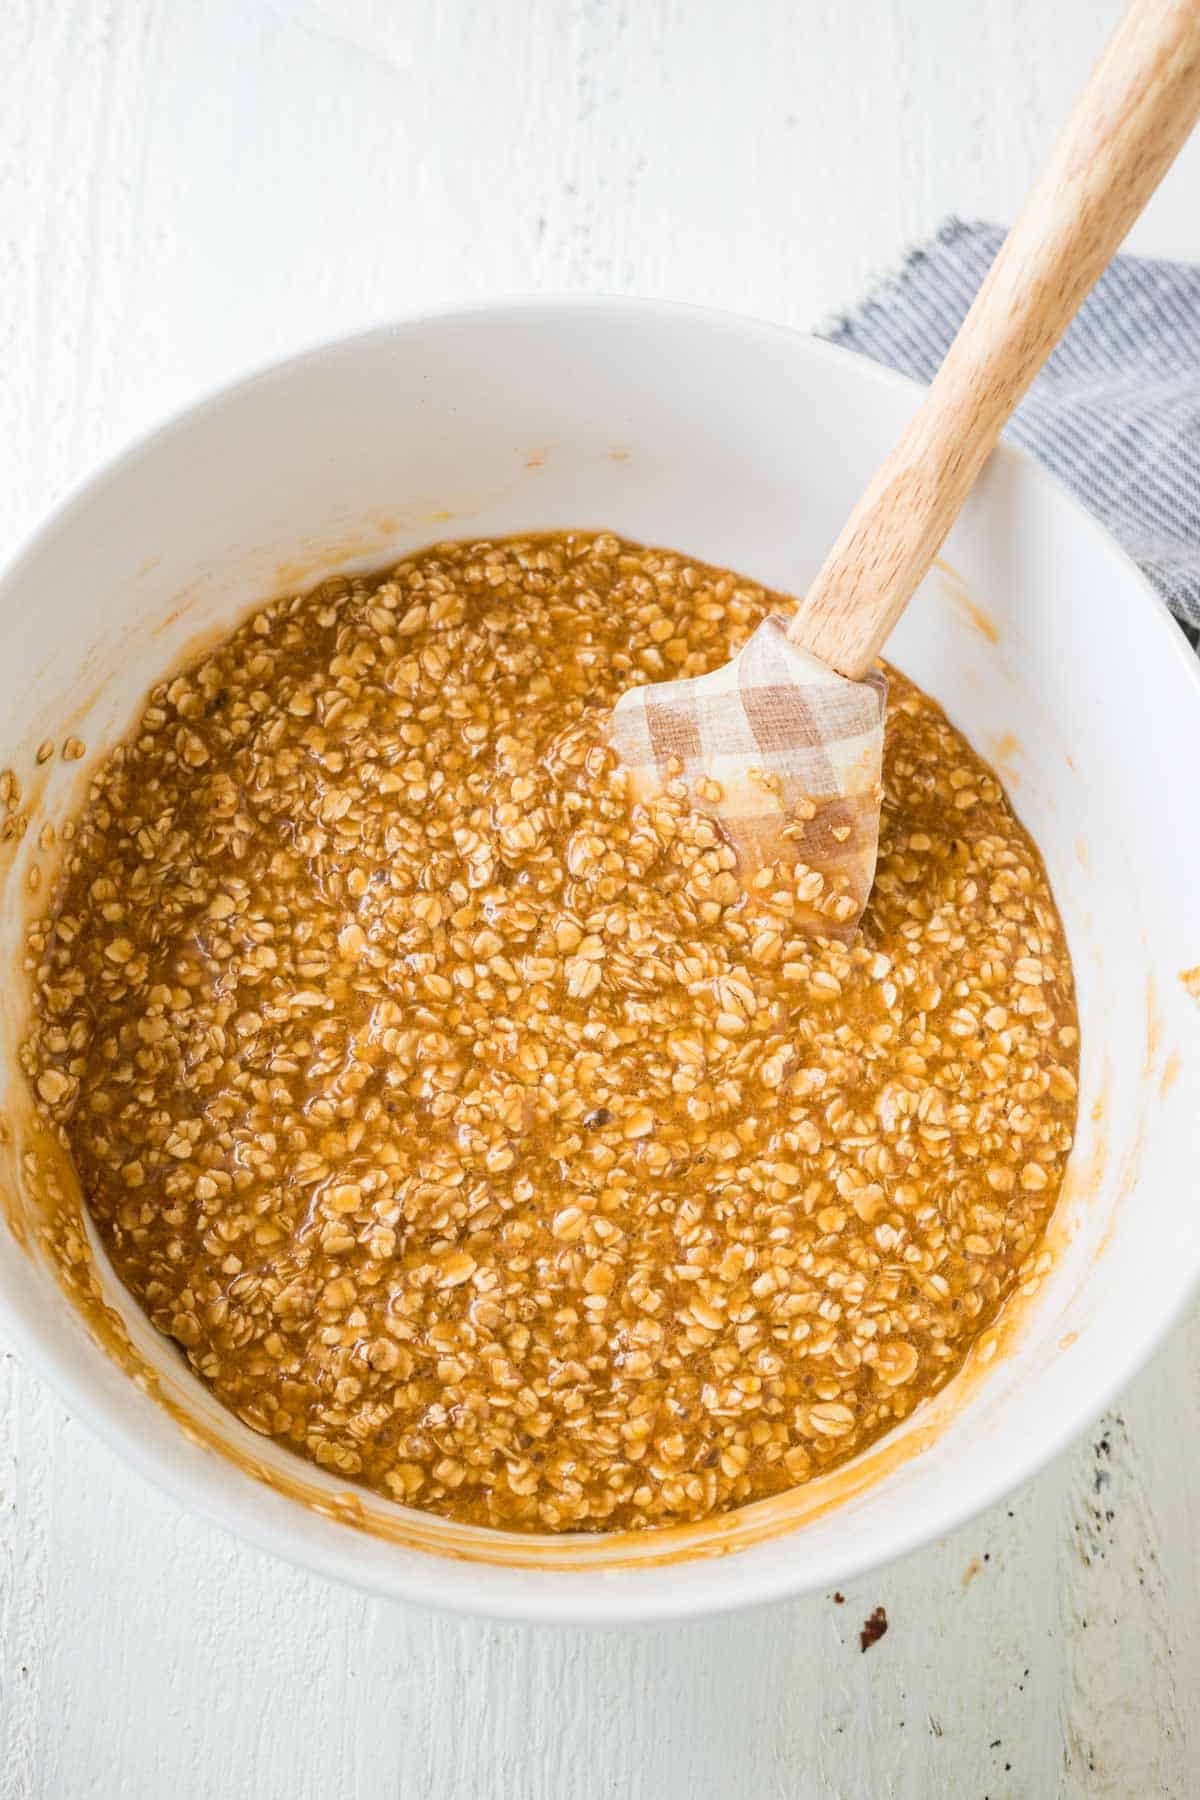 Oats in a caramel mixture in a mixing bowl.